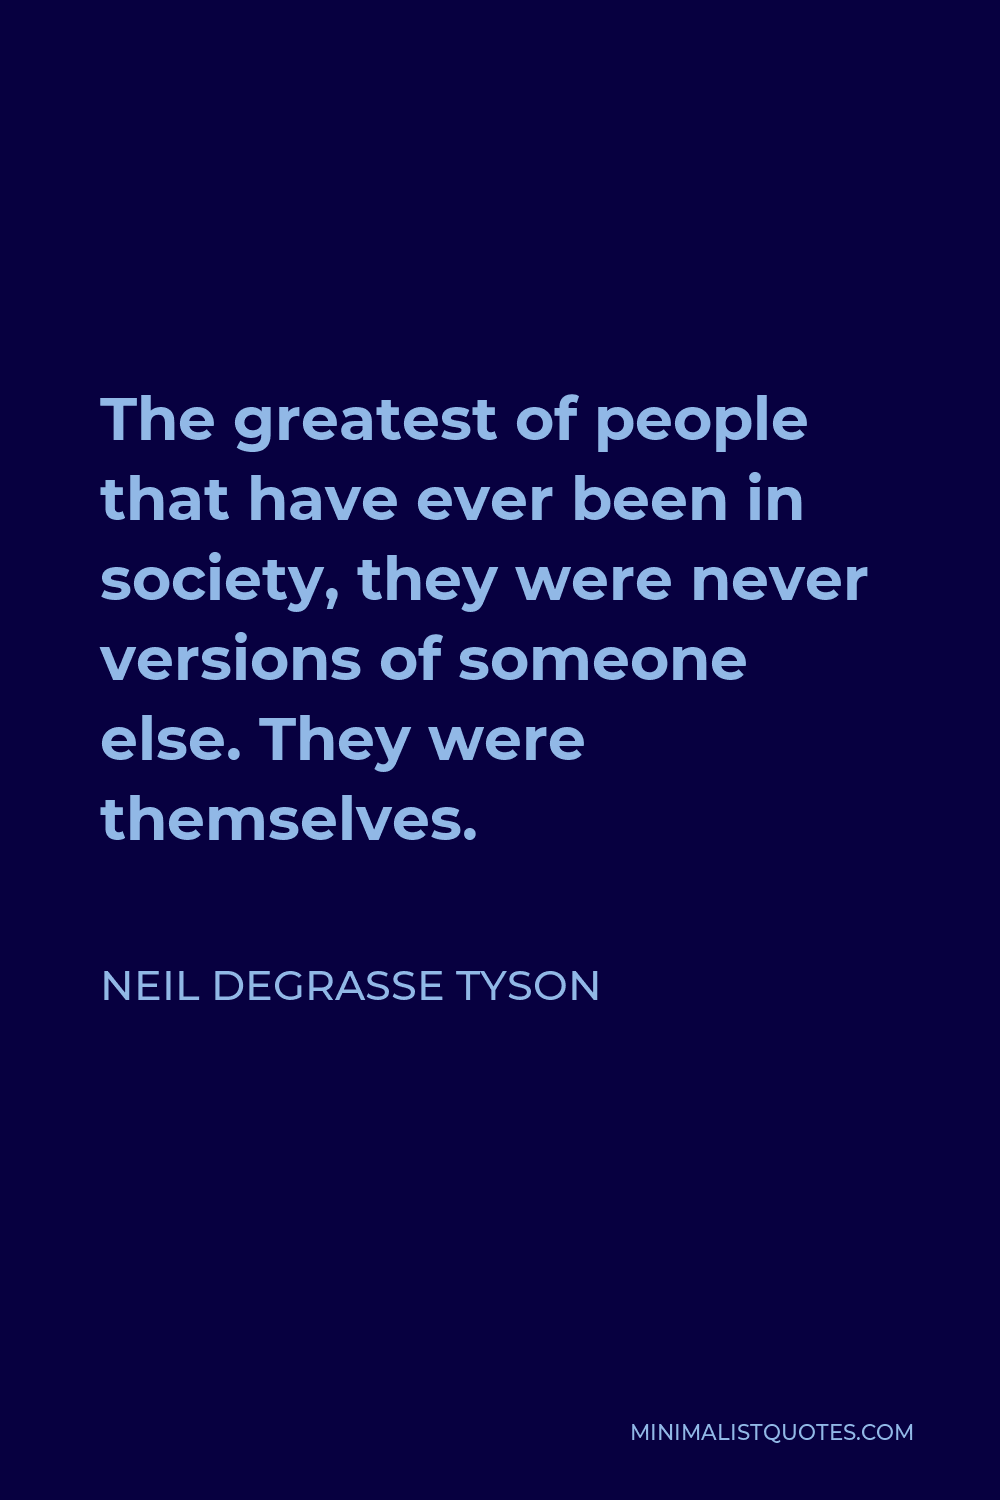 Neil deGrasse Tyson Quote - The greatest of people that have ever been in society, they were never versions of someone else. They were themselves.